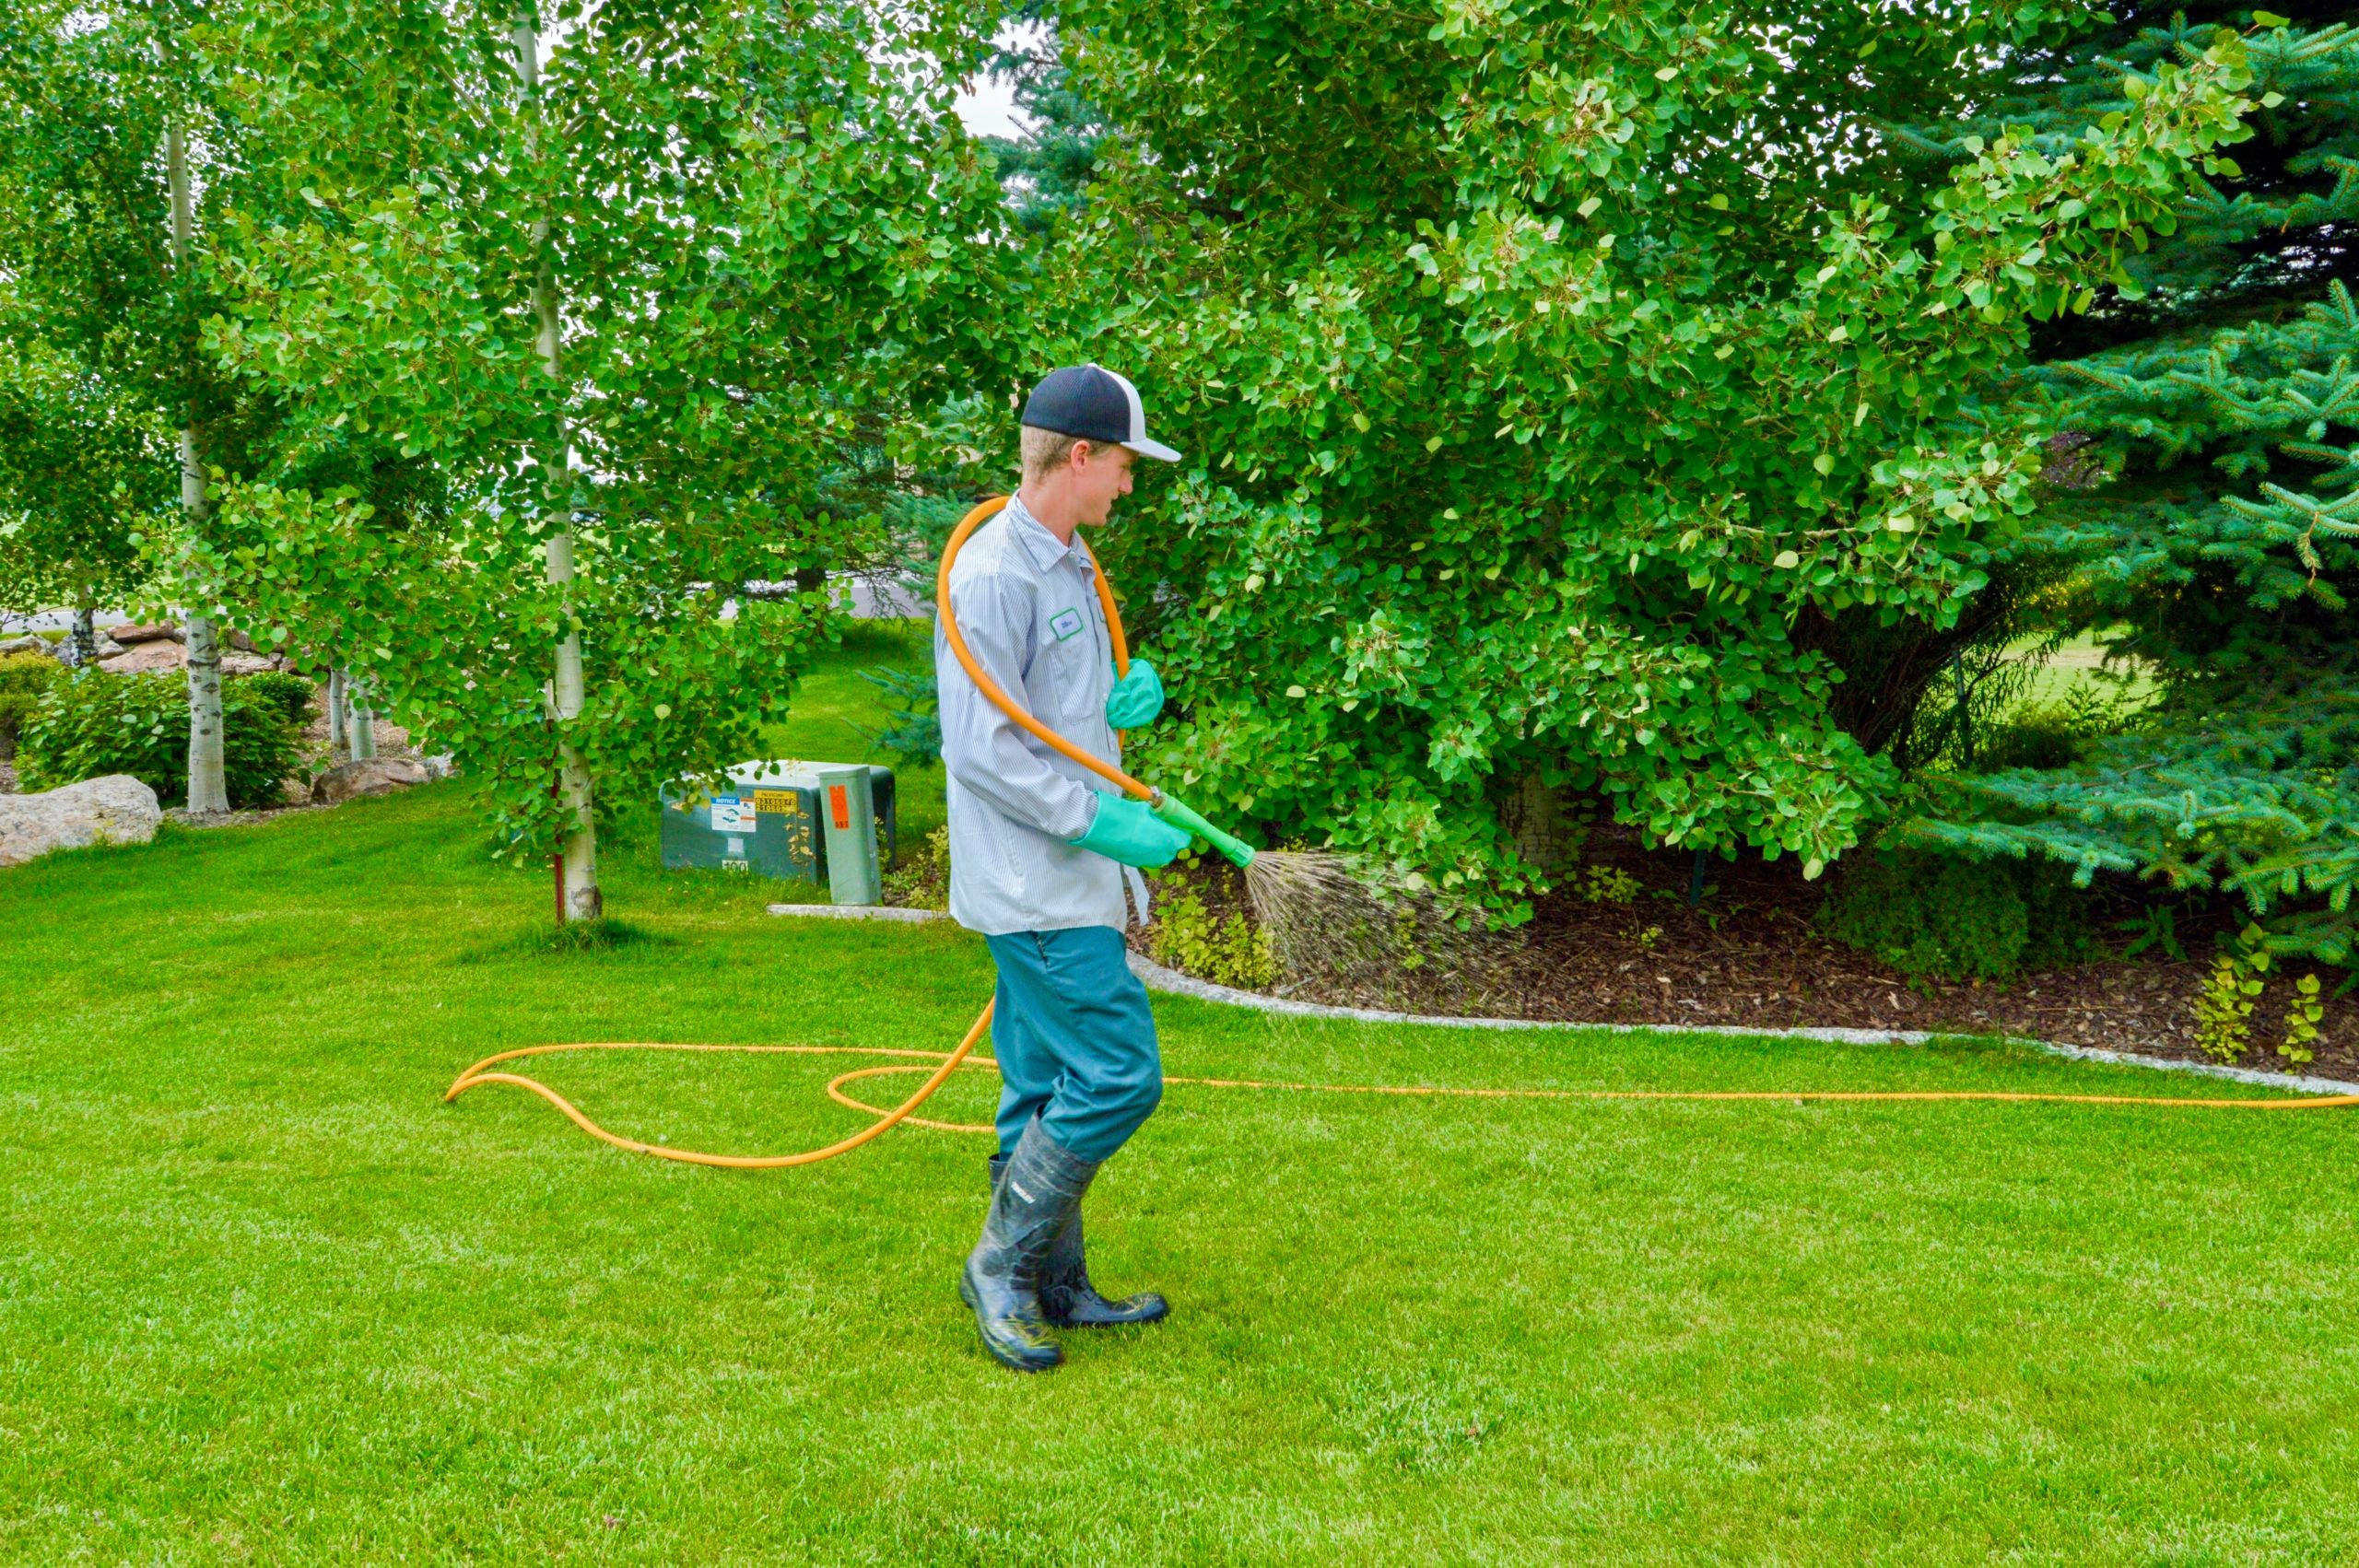 Lawn care technician applying weed control